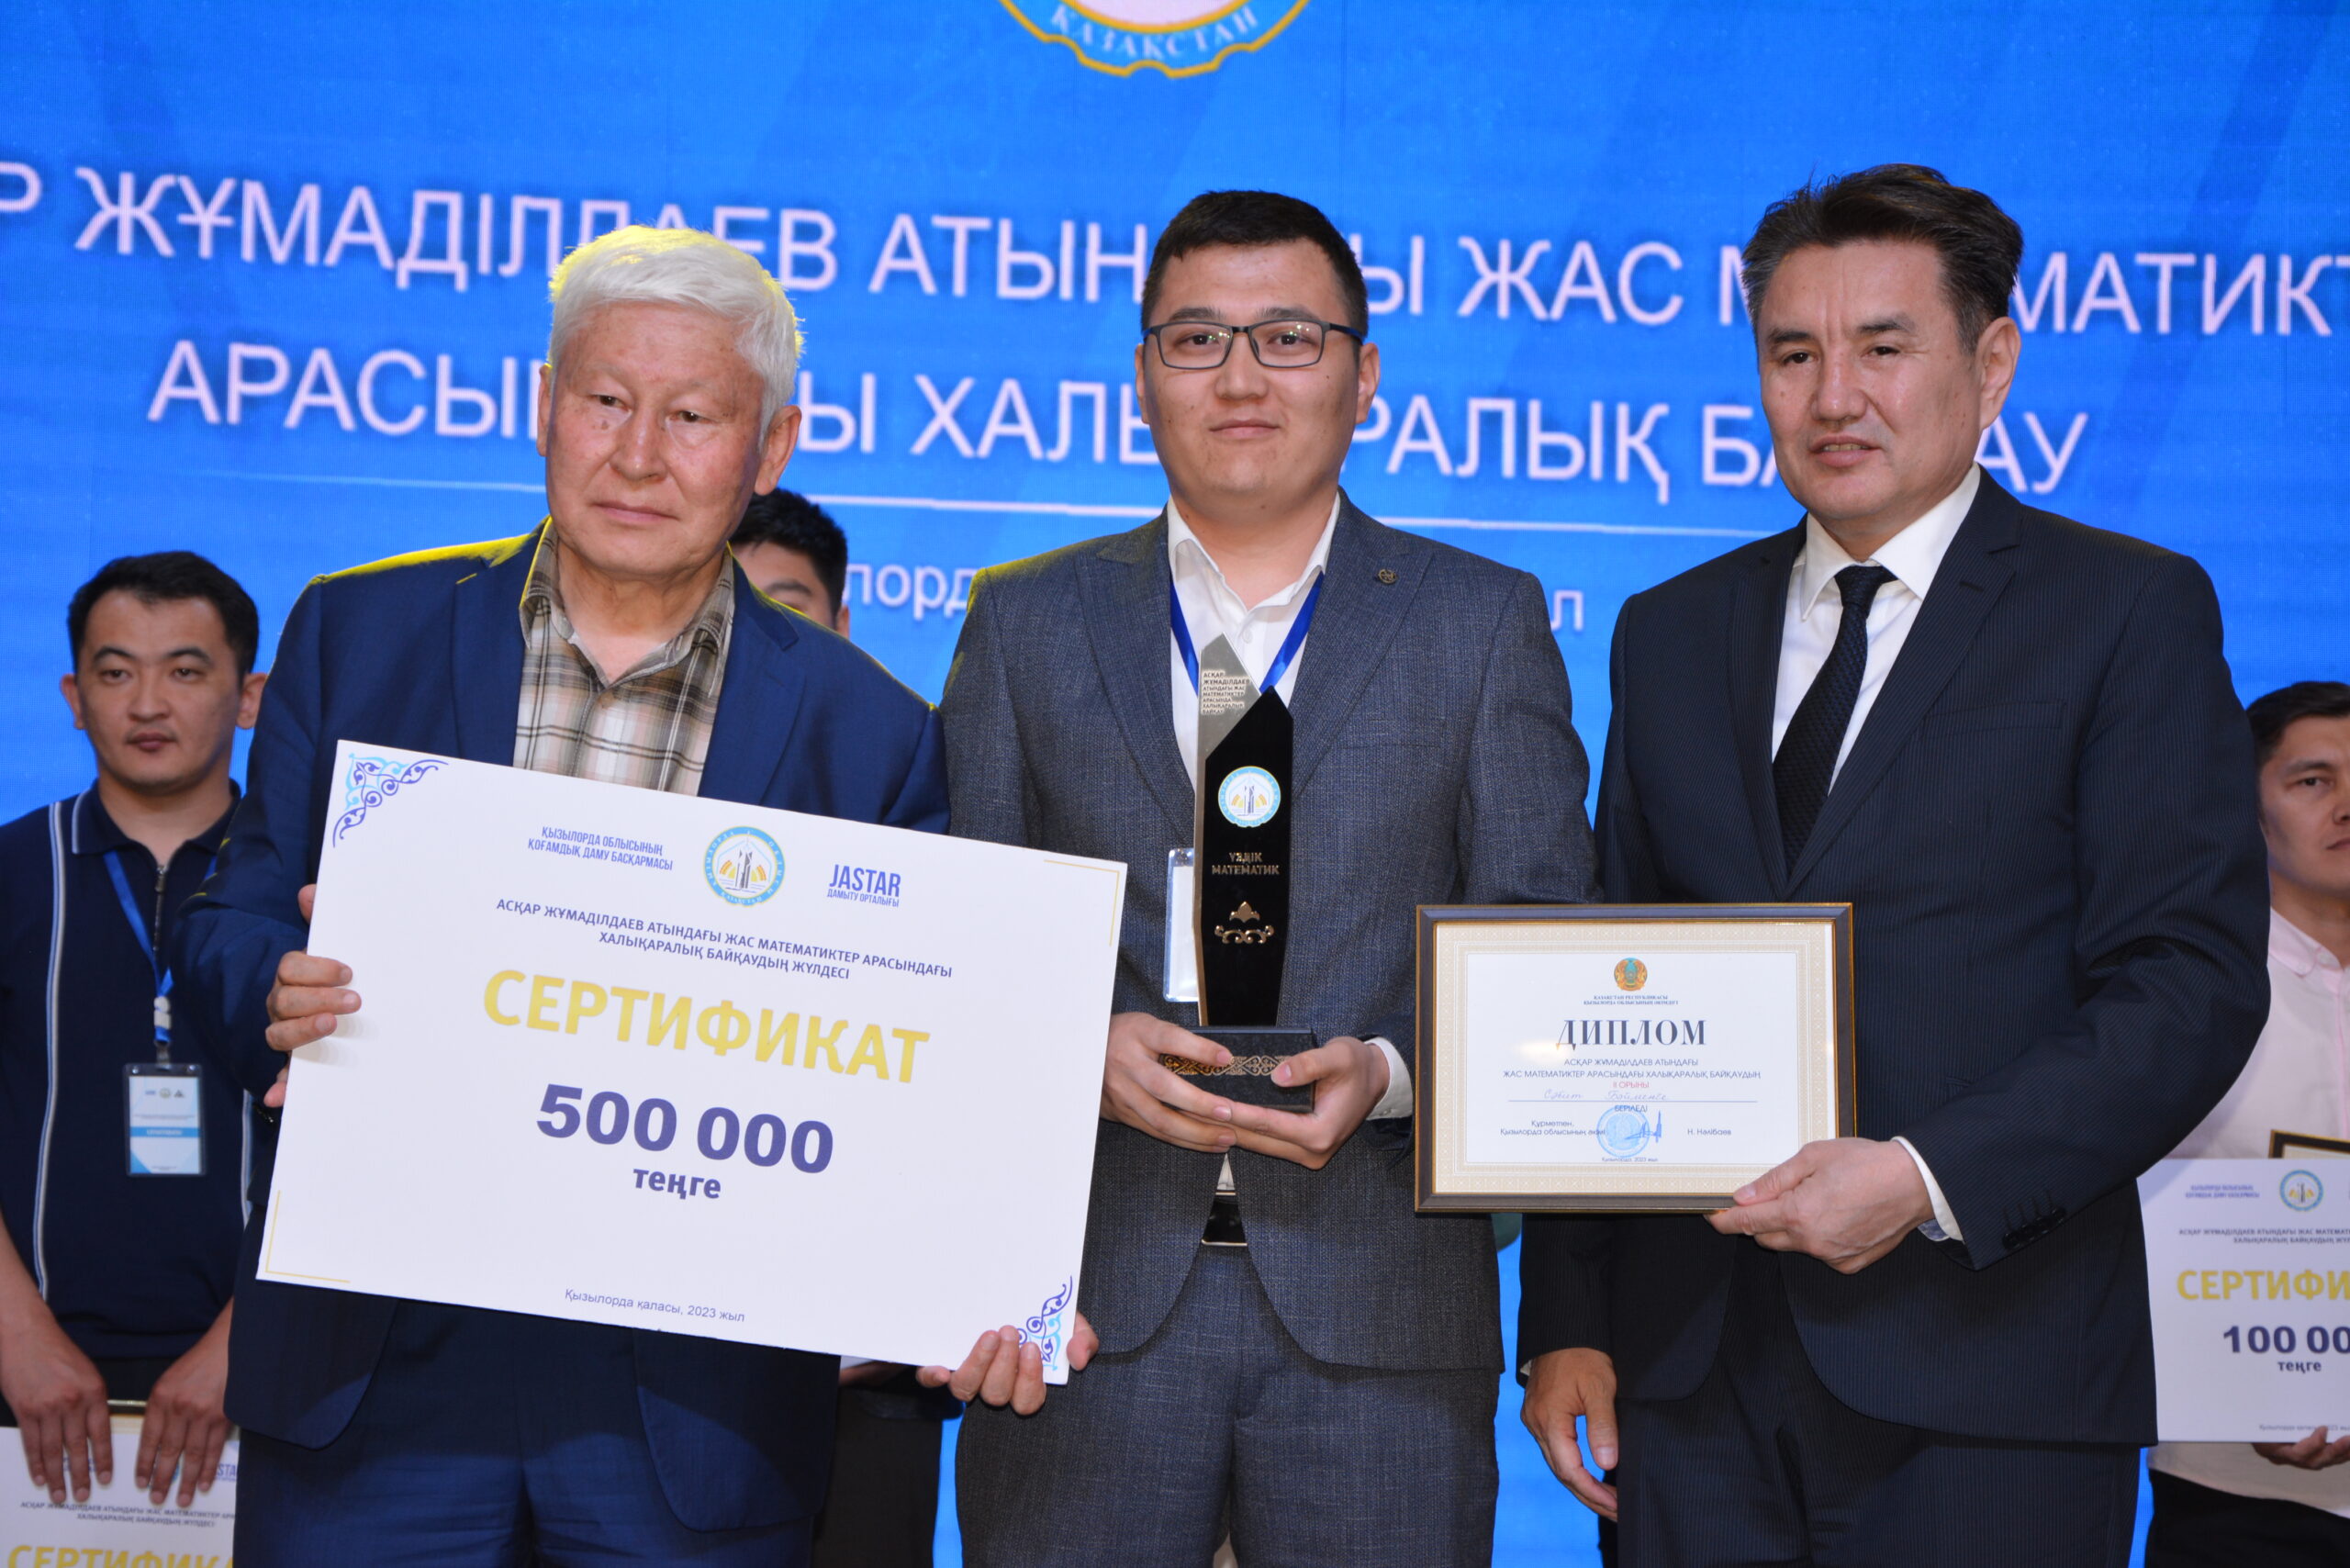 You are currently viewing NIS Kyzylorda teacher Baymen Sabit  became “The best mathematician”